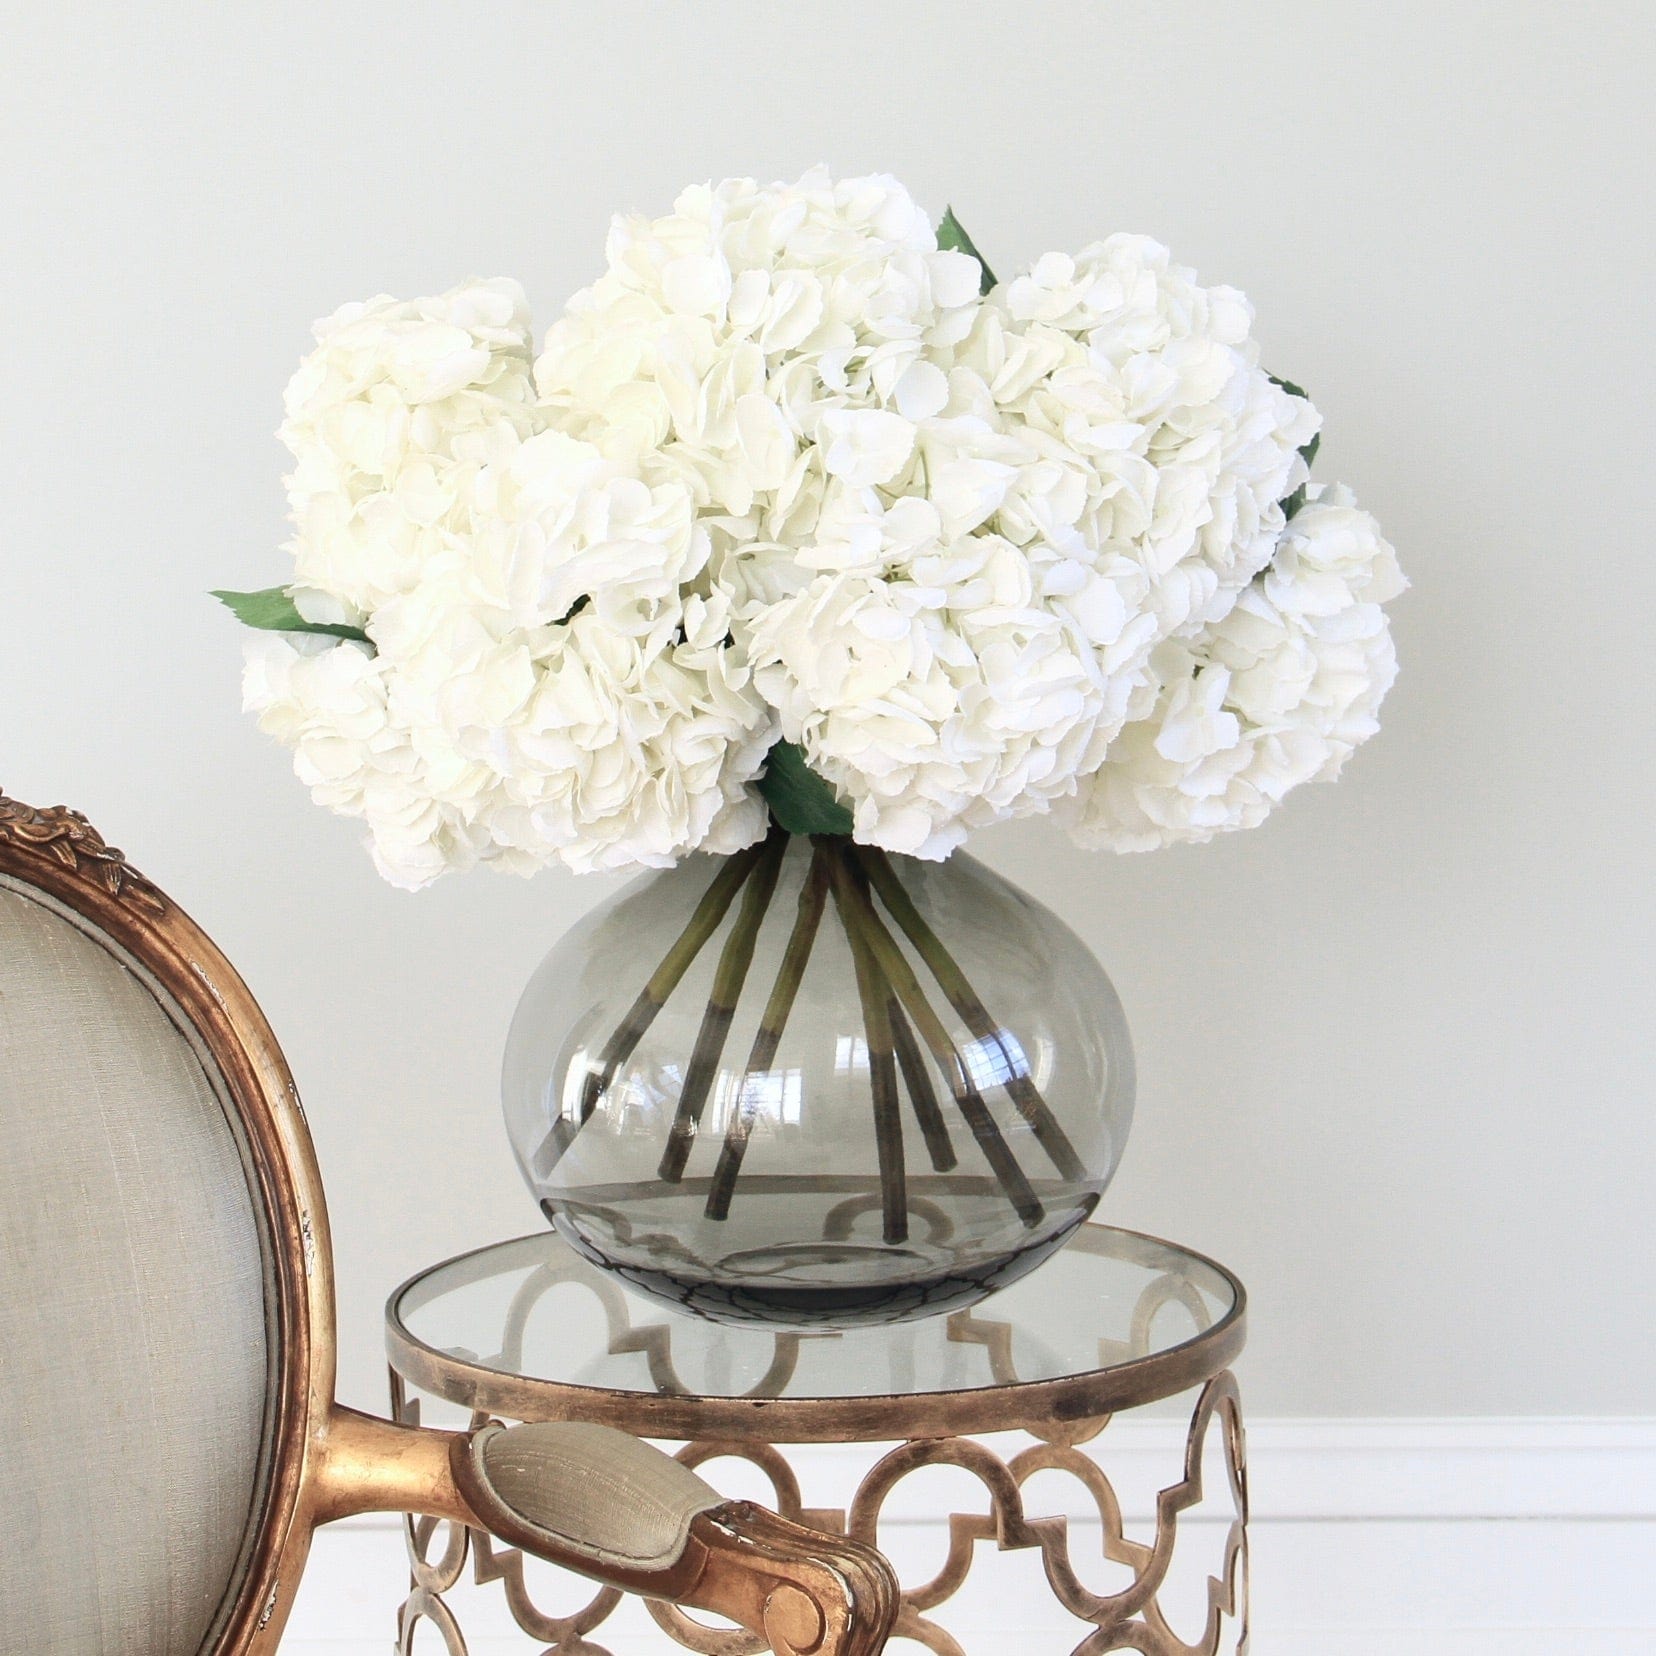 Artificial hydrangea luxury faux silk white hydrnagea in vase large lifelike realistic faux flowers from Amaranthine Blooms UK